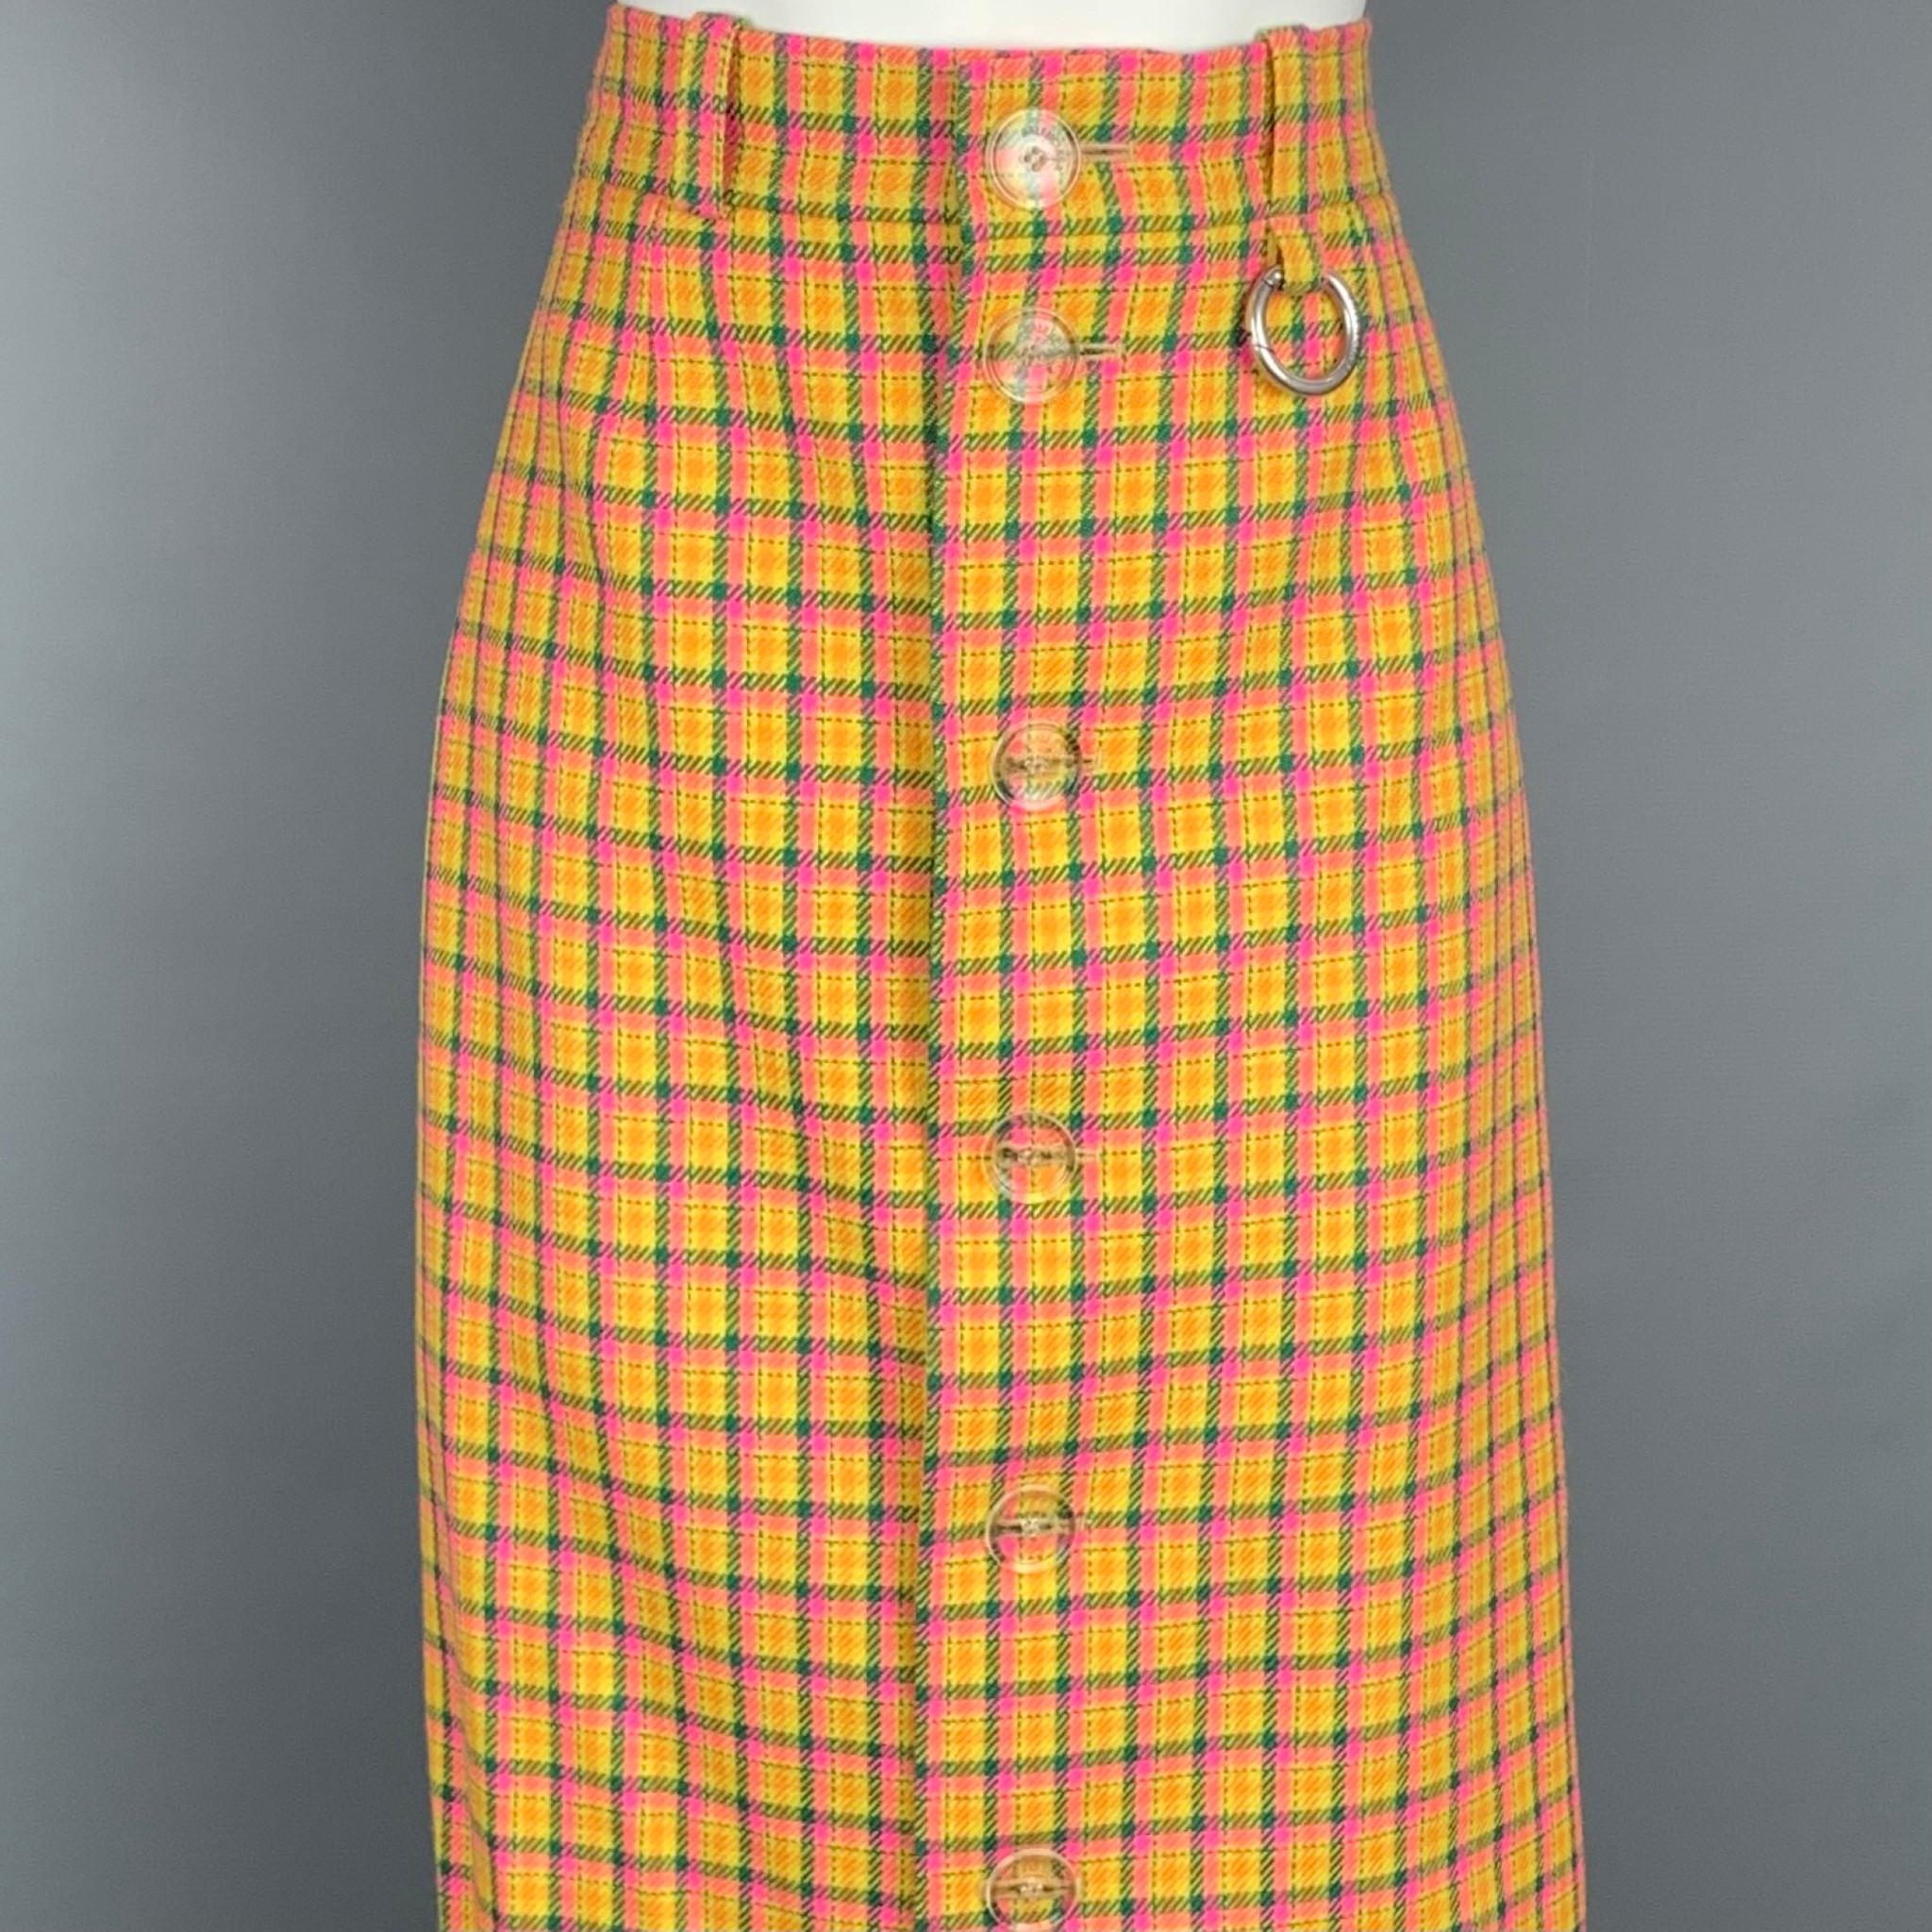 BALENCIAGA Fall Winter 2018 skirt by Demna Gvasalia comes in a yellow & pink check print wool wool blend with a black liner featuring a high waisted style, silver tone detachable hoop, mid-length fit, belt loops, and a clear button closure. Made in